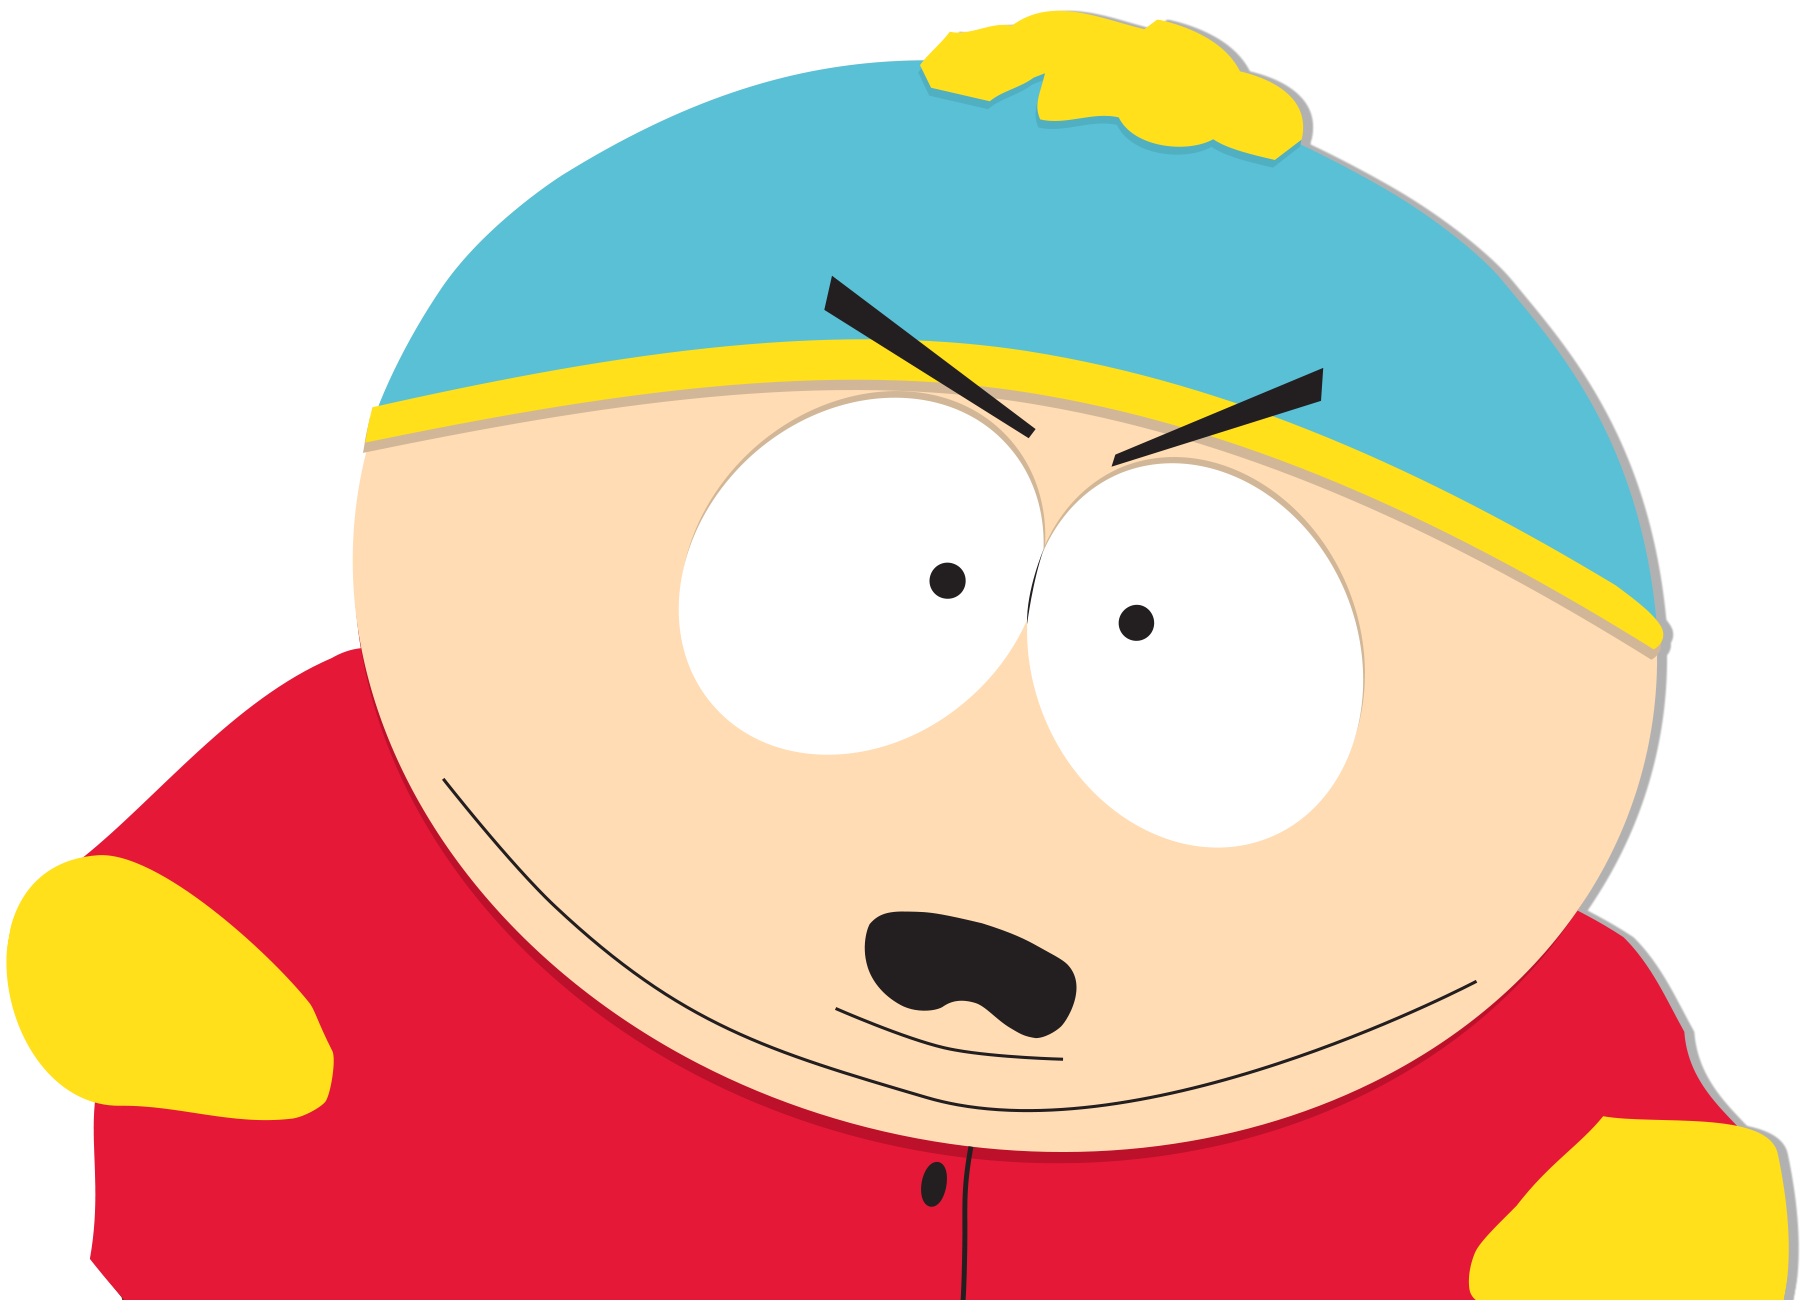 christal myers recommends Pictures Of Cartman From South Park